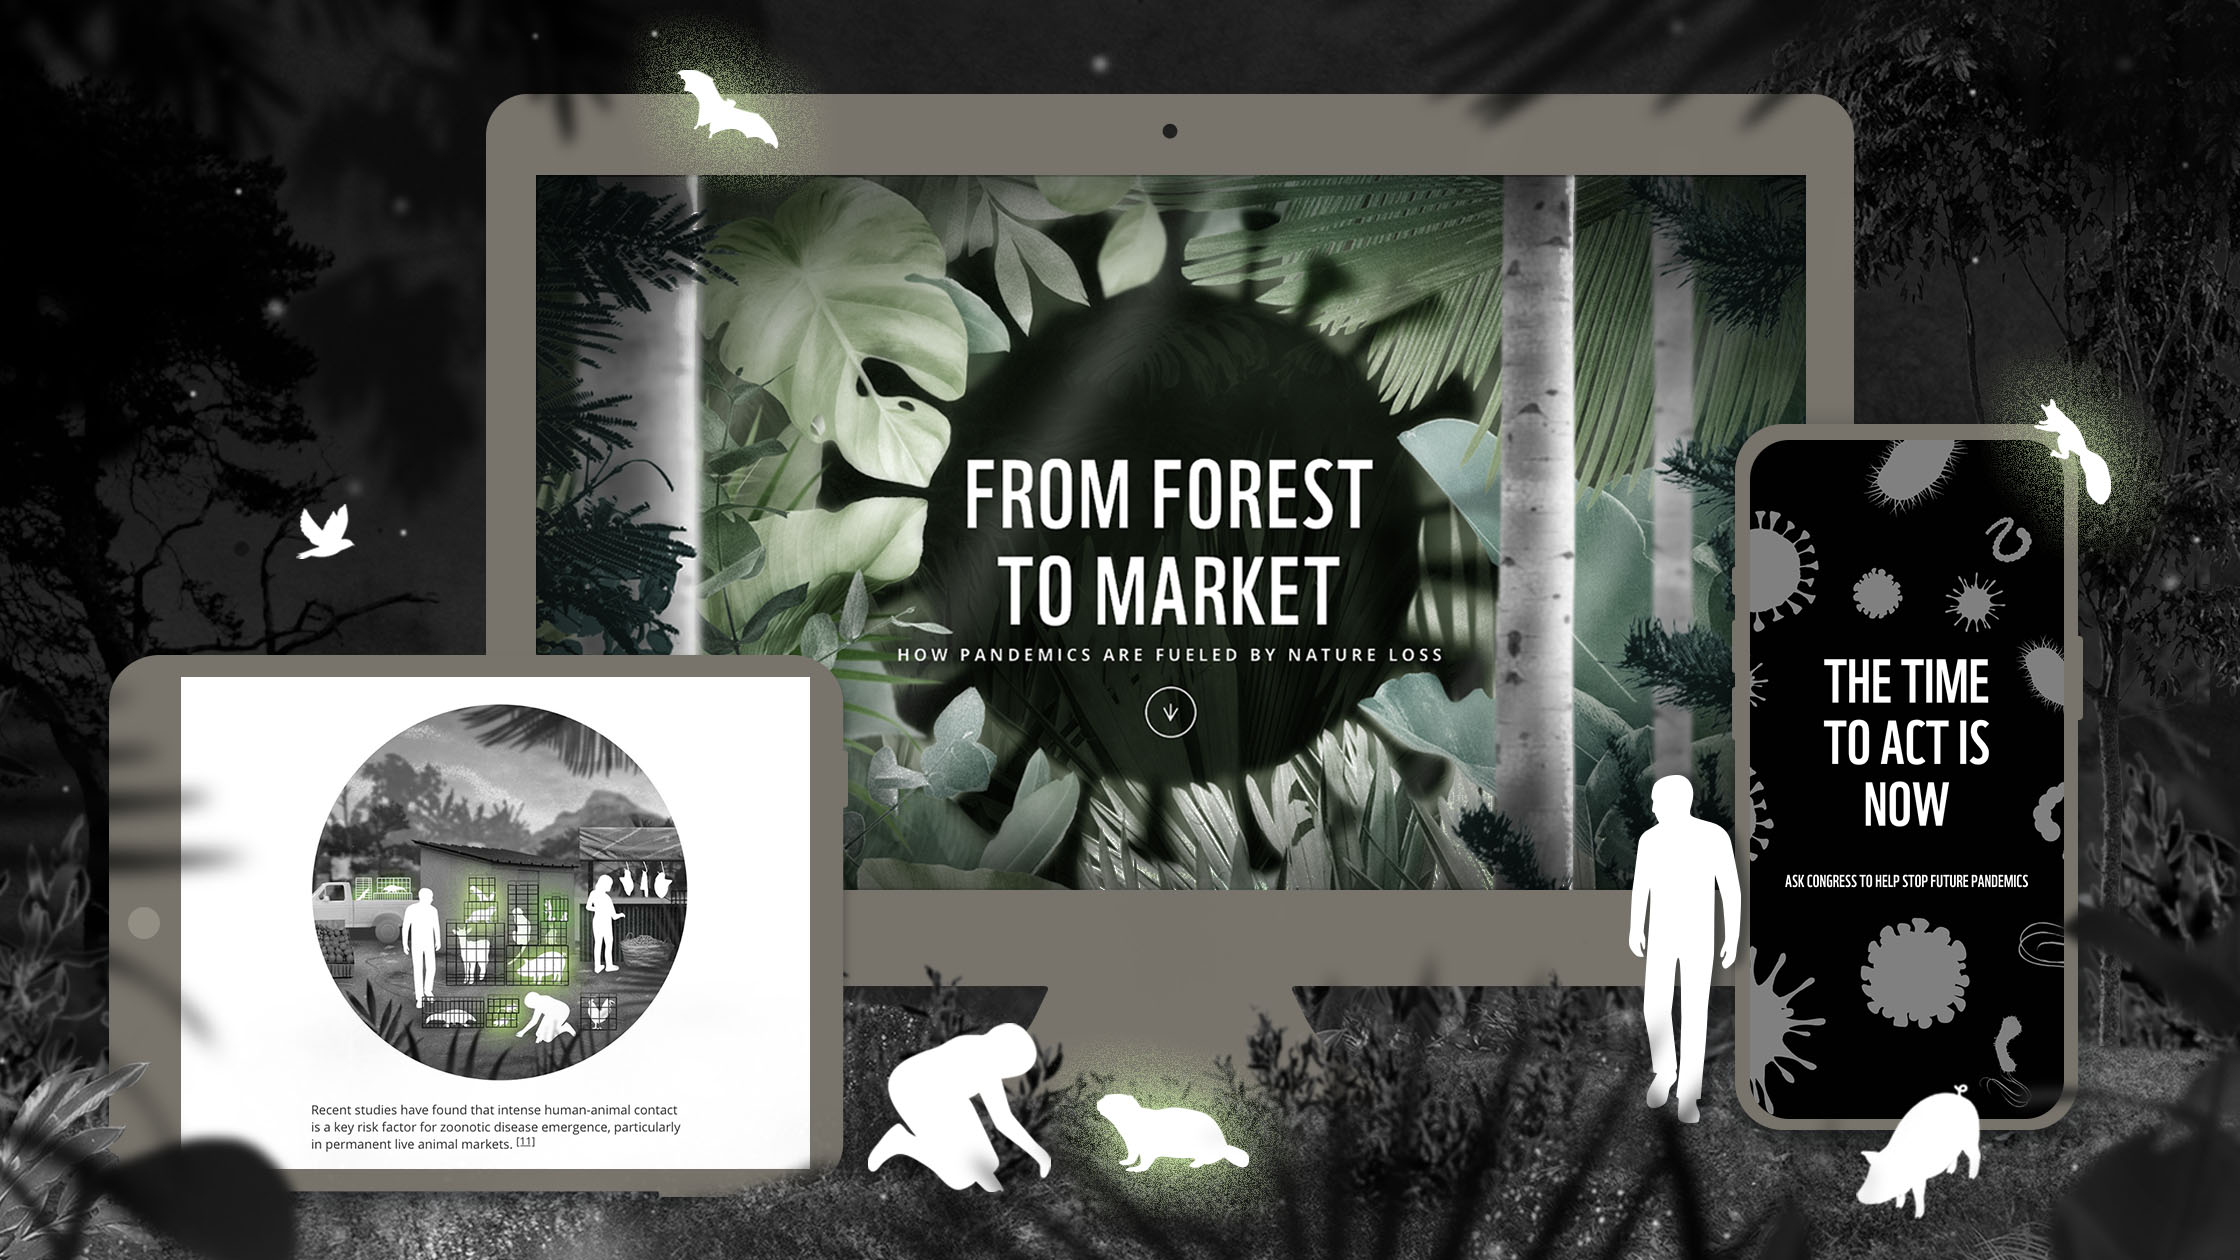 A stylized image shows a computer screen, tablet, and smartphone displaying nature-themed graphics. Central text on the computer screen reads, "From Forest to Market," while the phone displays, "The Time to Act Is Now." Silhouettes of animals and trees decorate the scene.